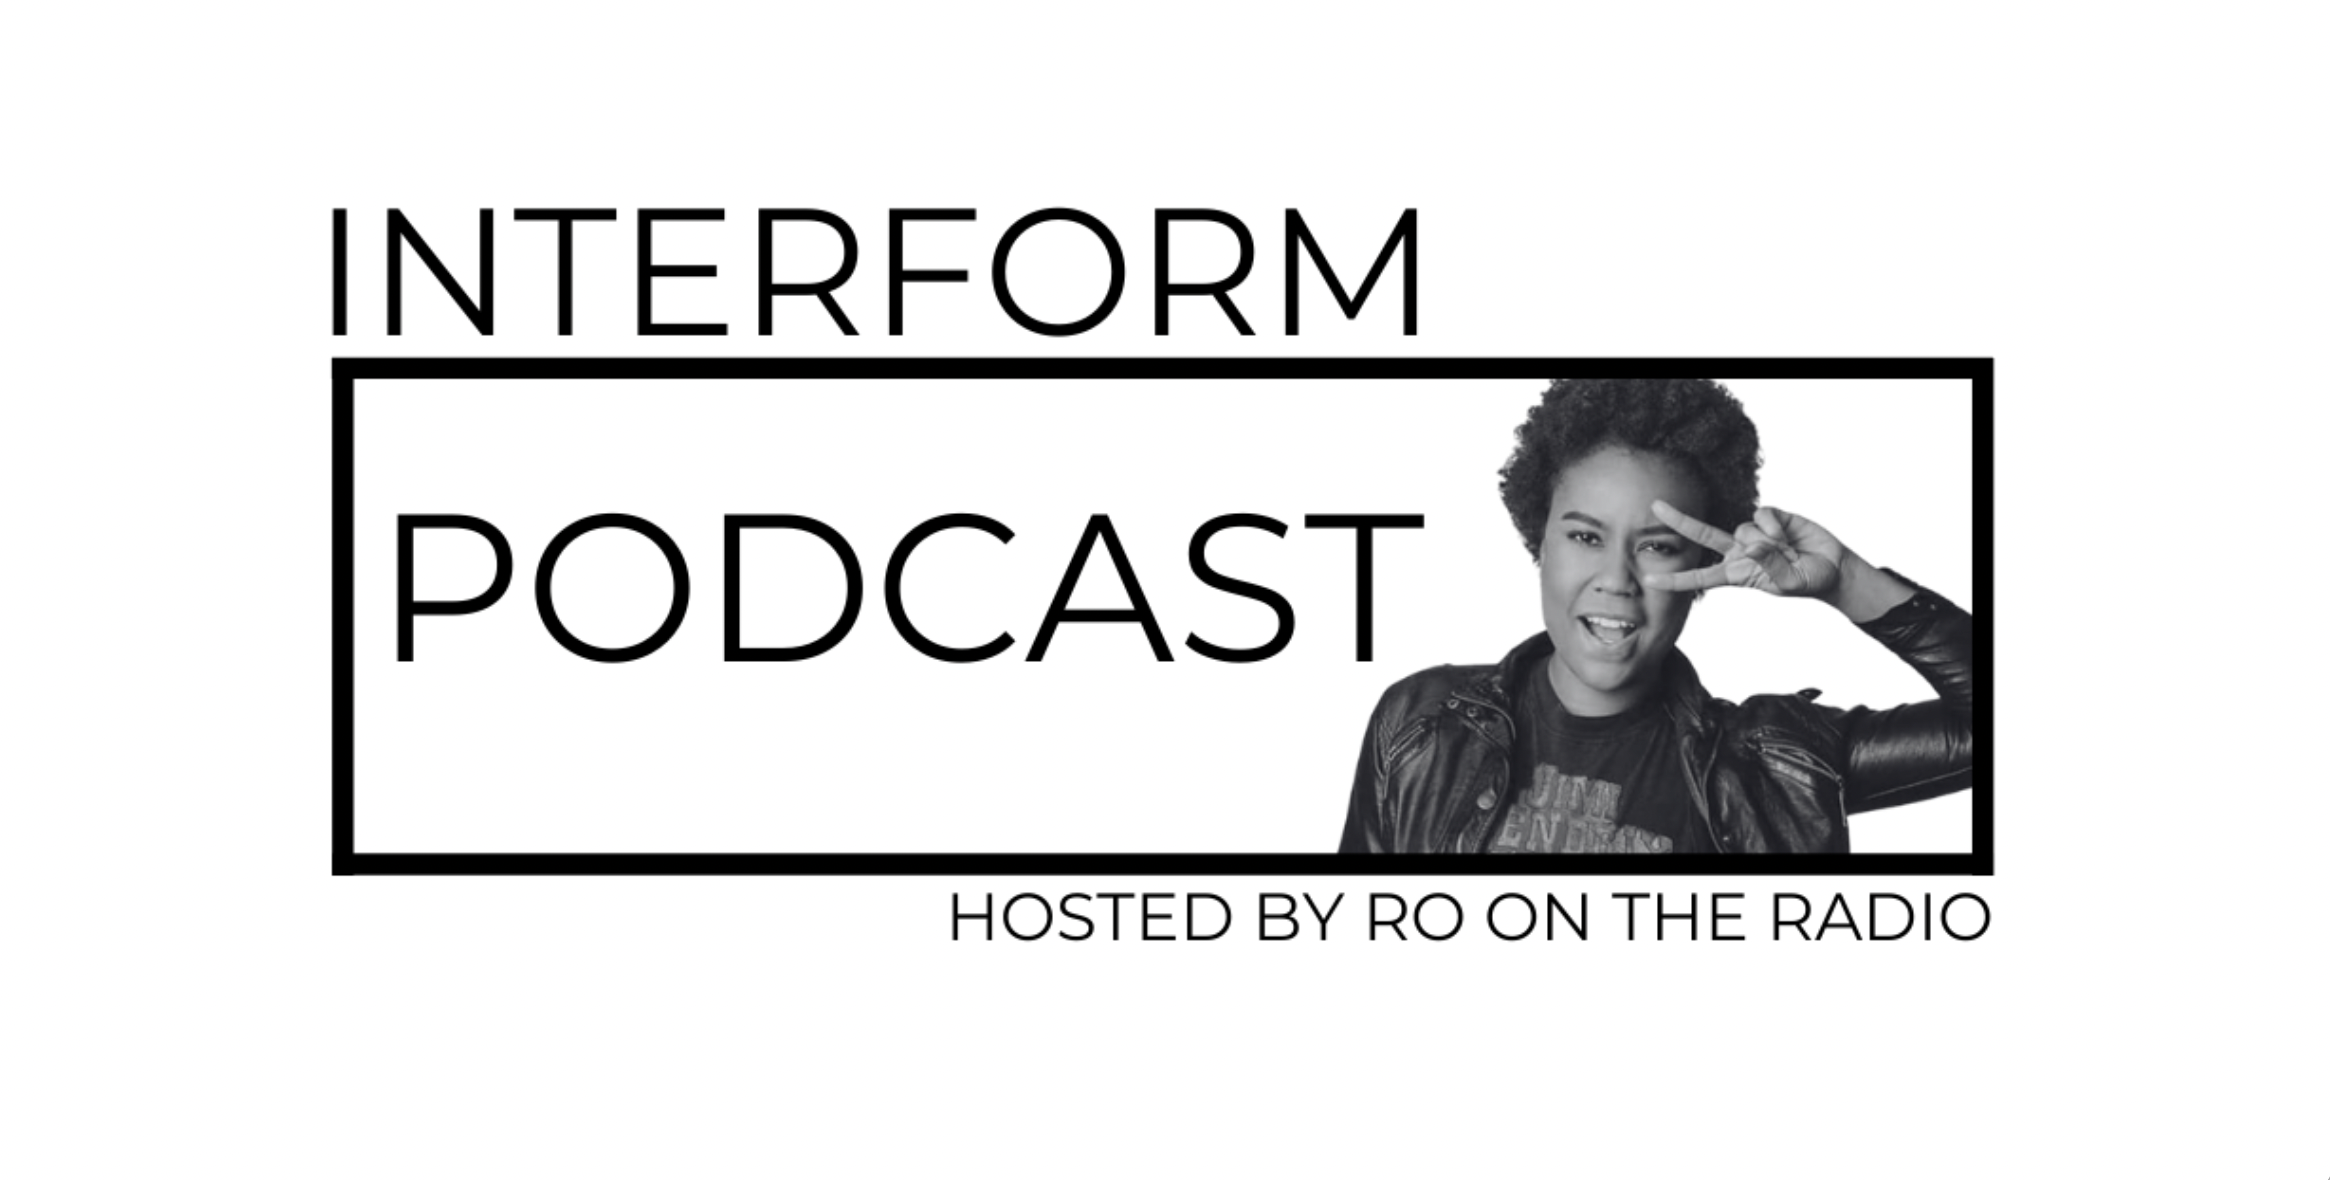 Does your vote really matter? Our convo with Interform’s Rochelle Bailey